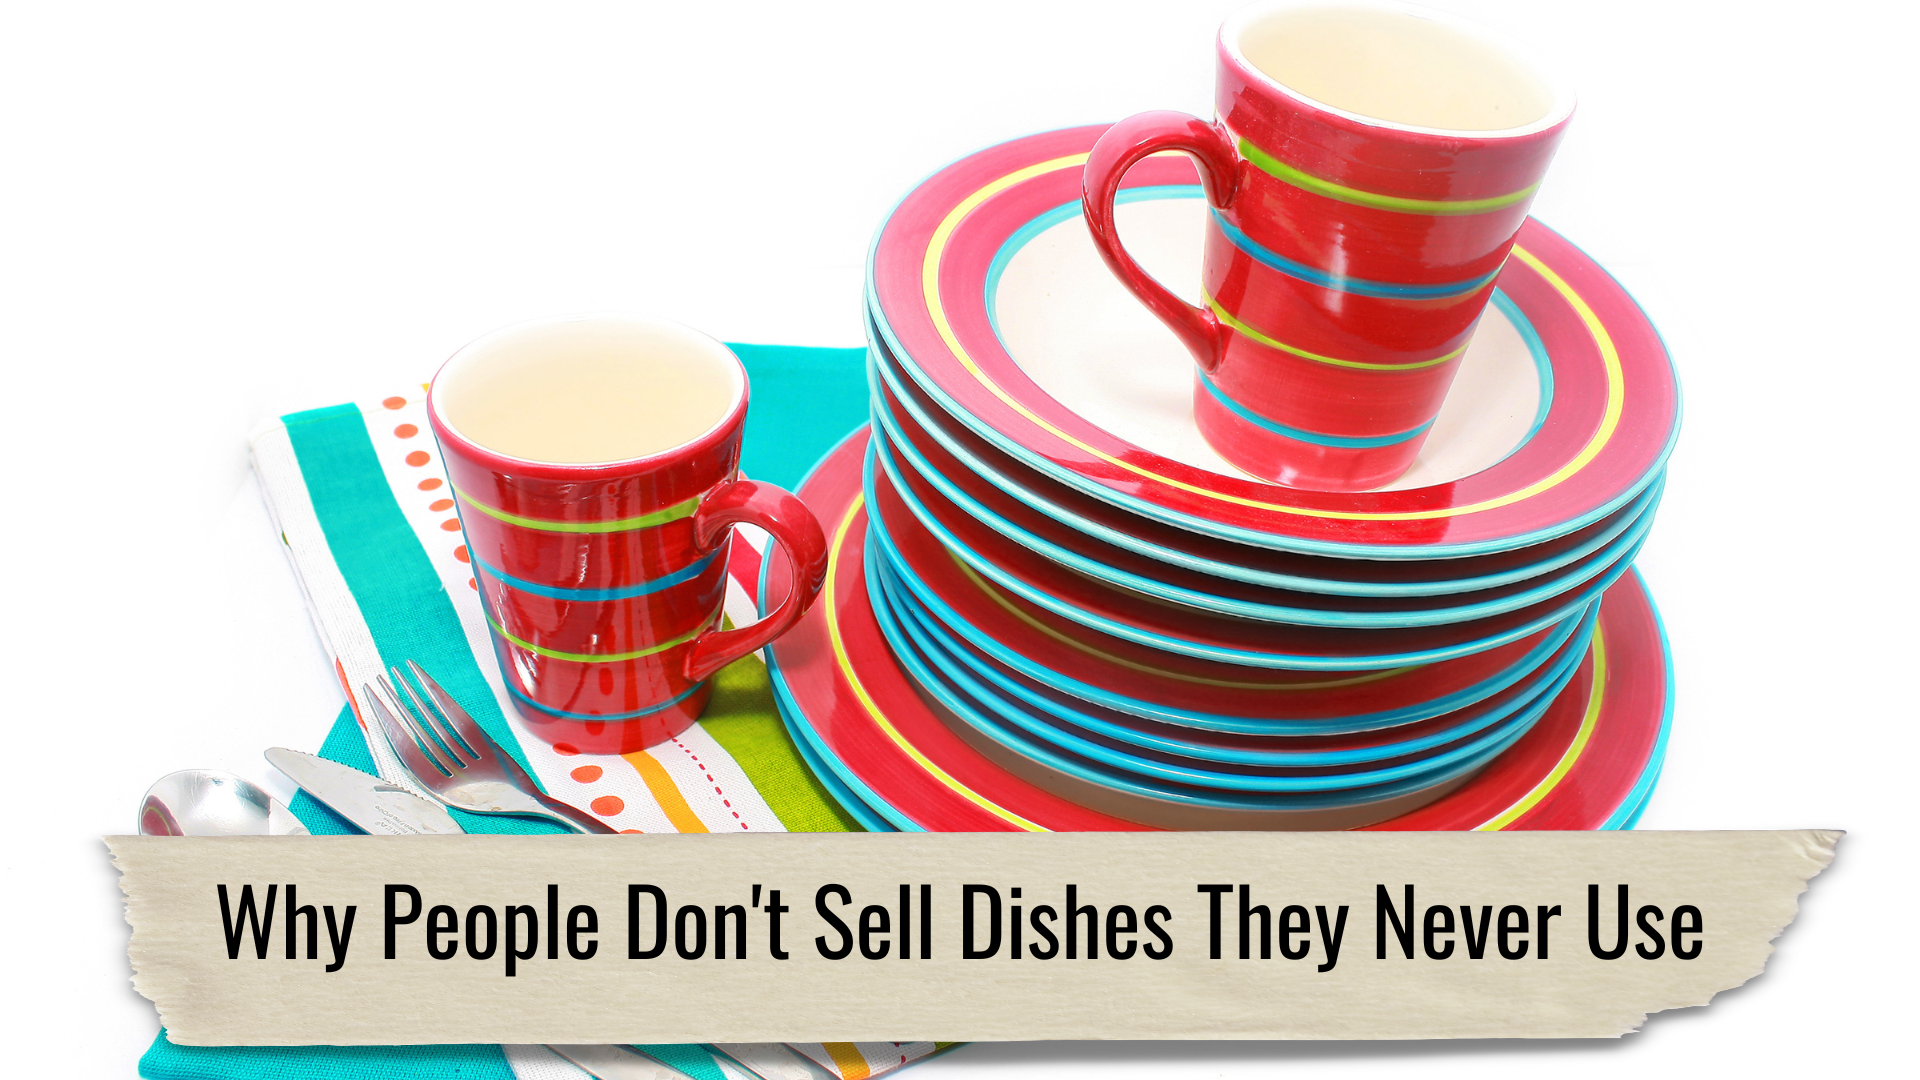 04 Why People Don't Sell Dishes They Never Use